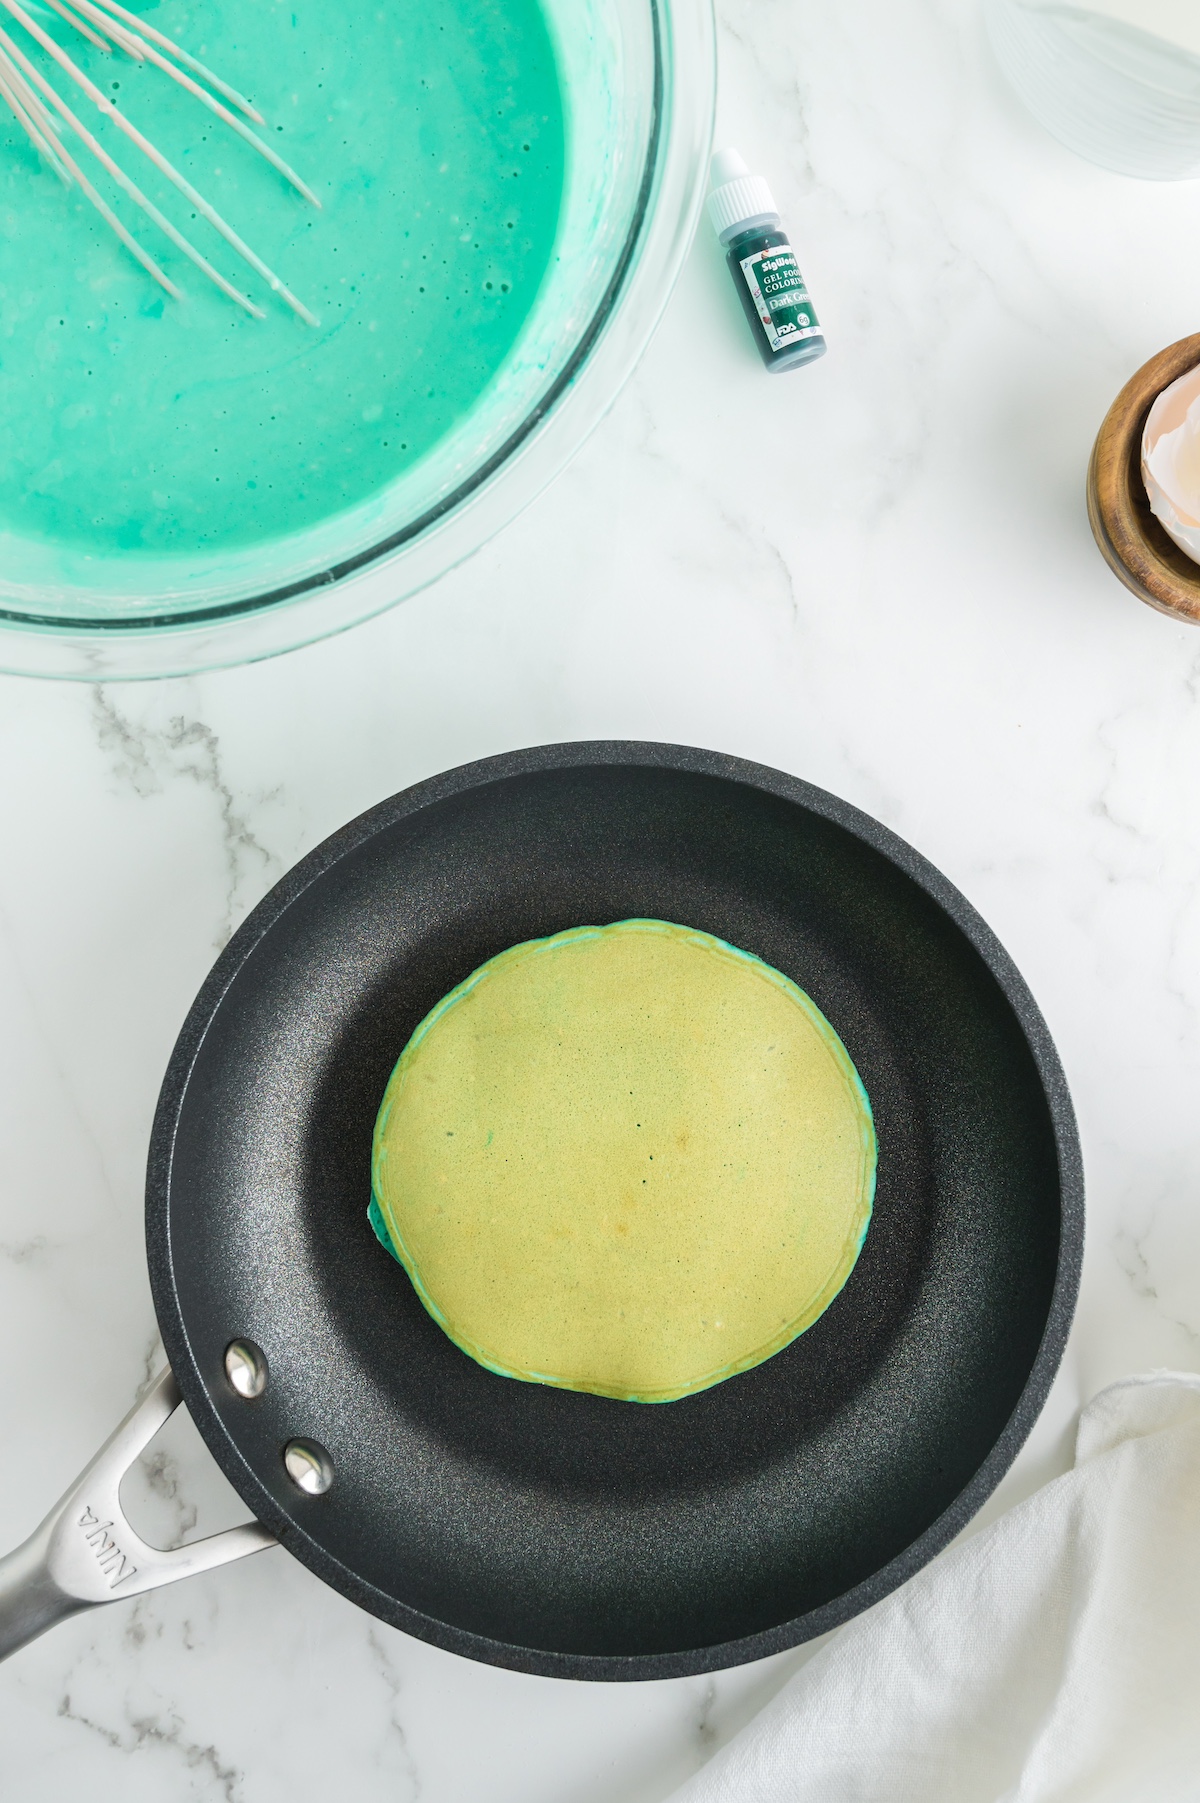 Green pancake flipped over in a pan